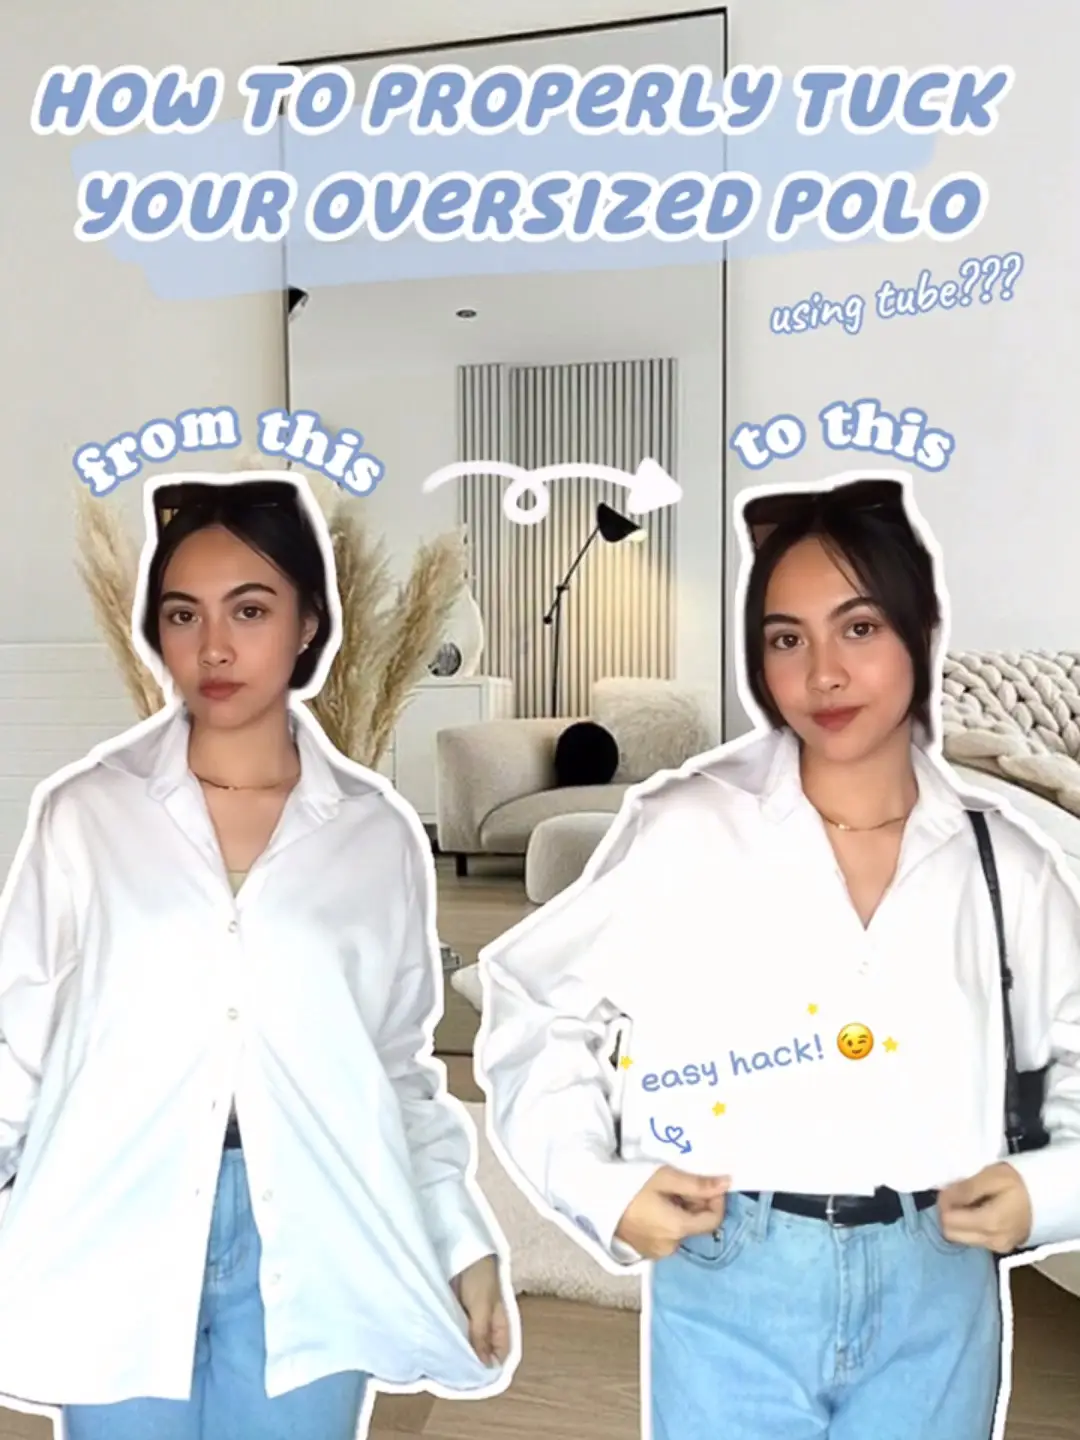 How to style an Oversized Polo Shirt for Women